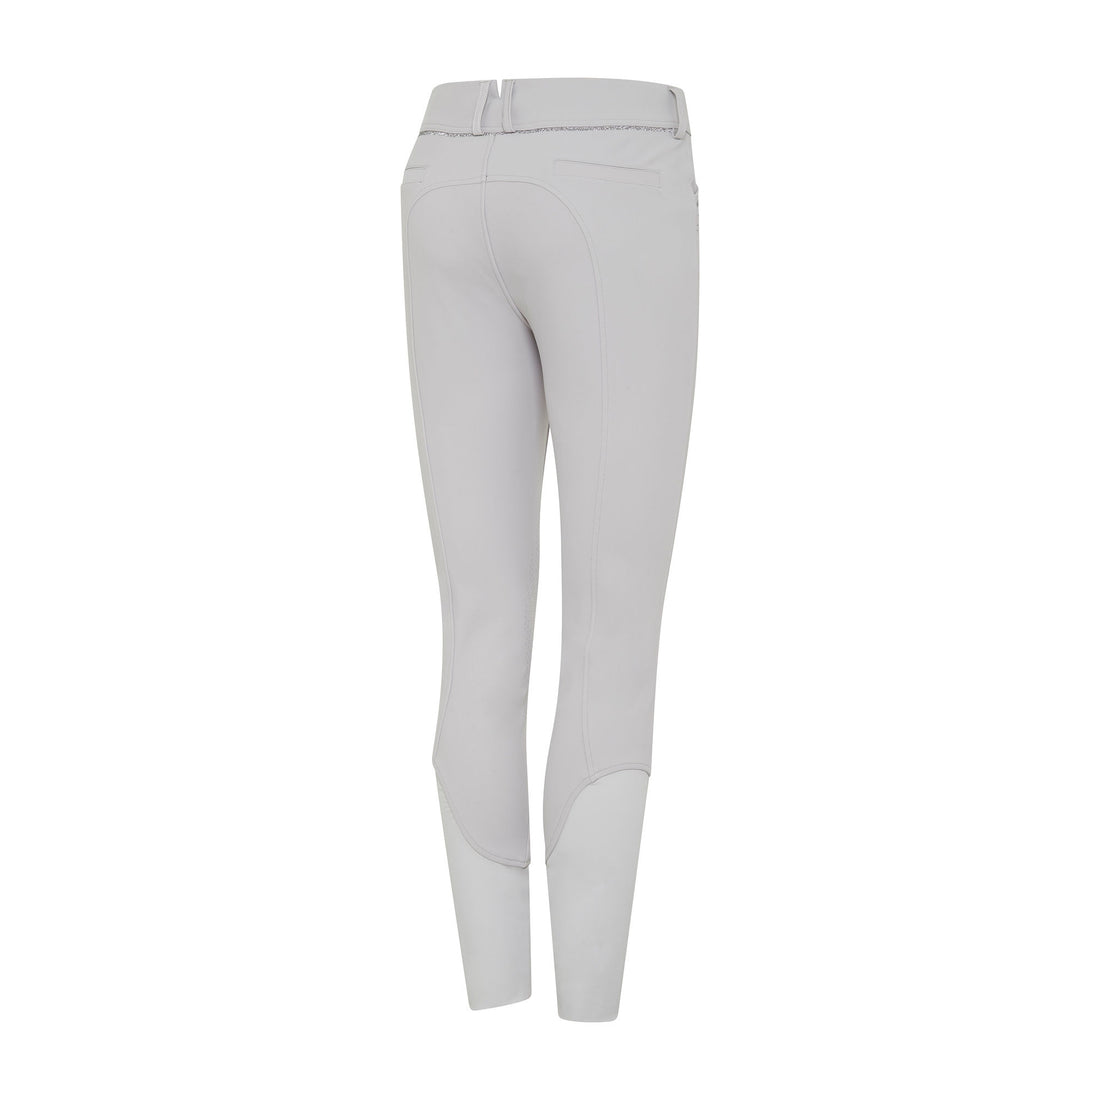 The Celeste knee grip breeches in stone grey by Samshield. These breeches have a subtle glitter detailing on the front pockets with a glitter trim and finished with a scattered gem design underneath the strip